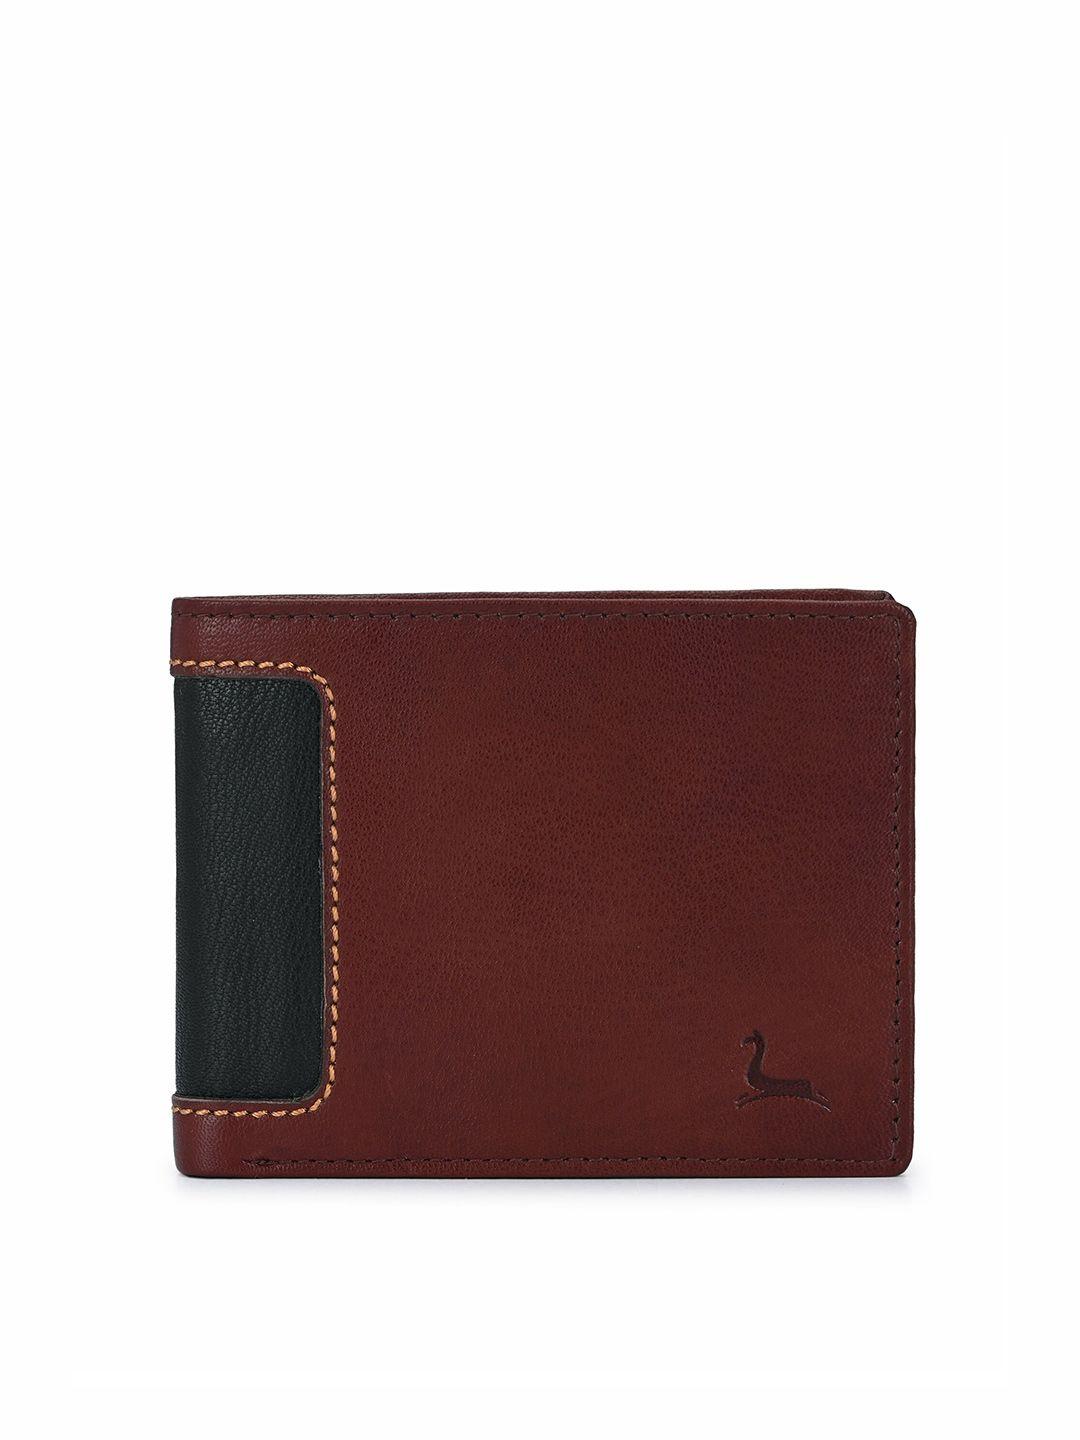 pacific gold men leather two fold wallet